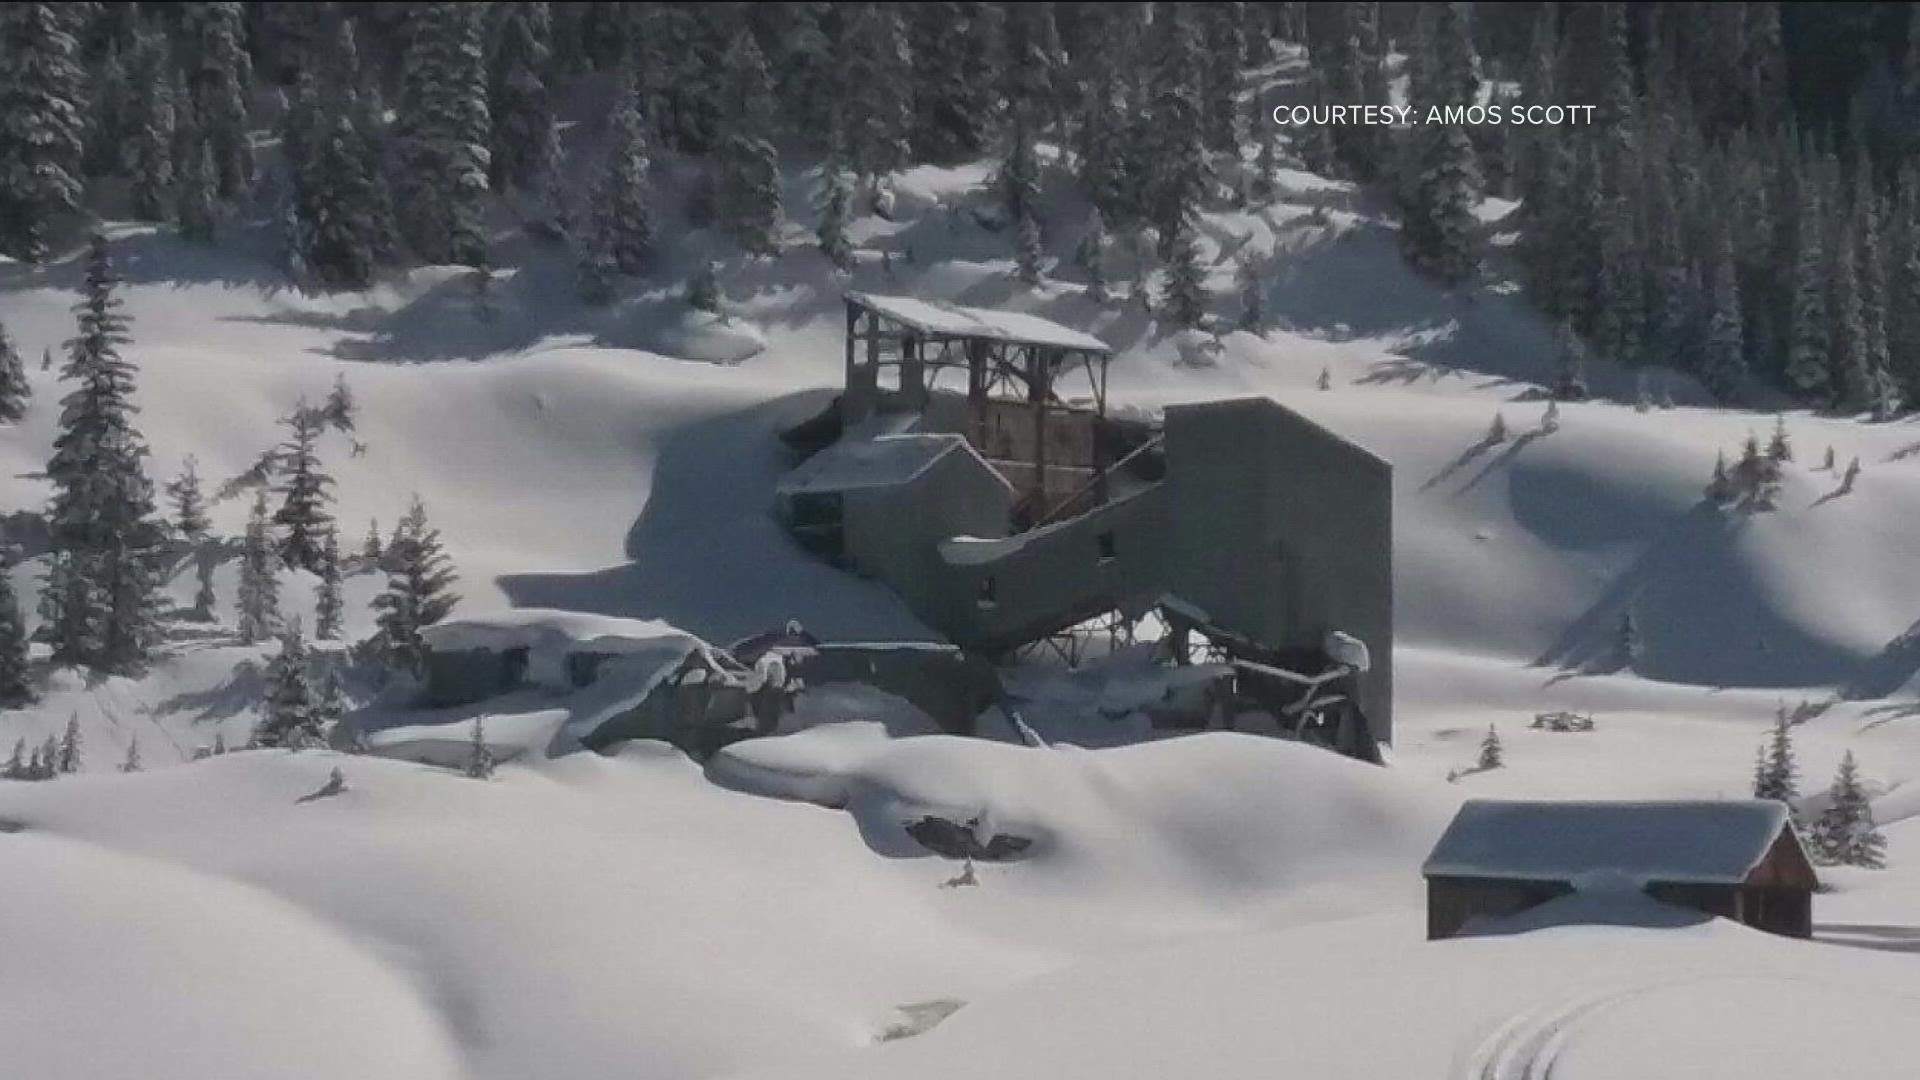 Have you heard of Cinnabar? One of Idaho's oldest mining towns comes packed with a lot of snow...and history. Viewer Scott Amos provides a glimpse of the ghost town.